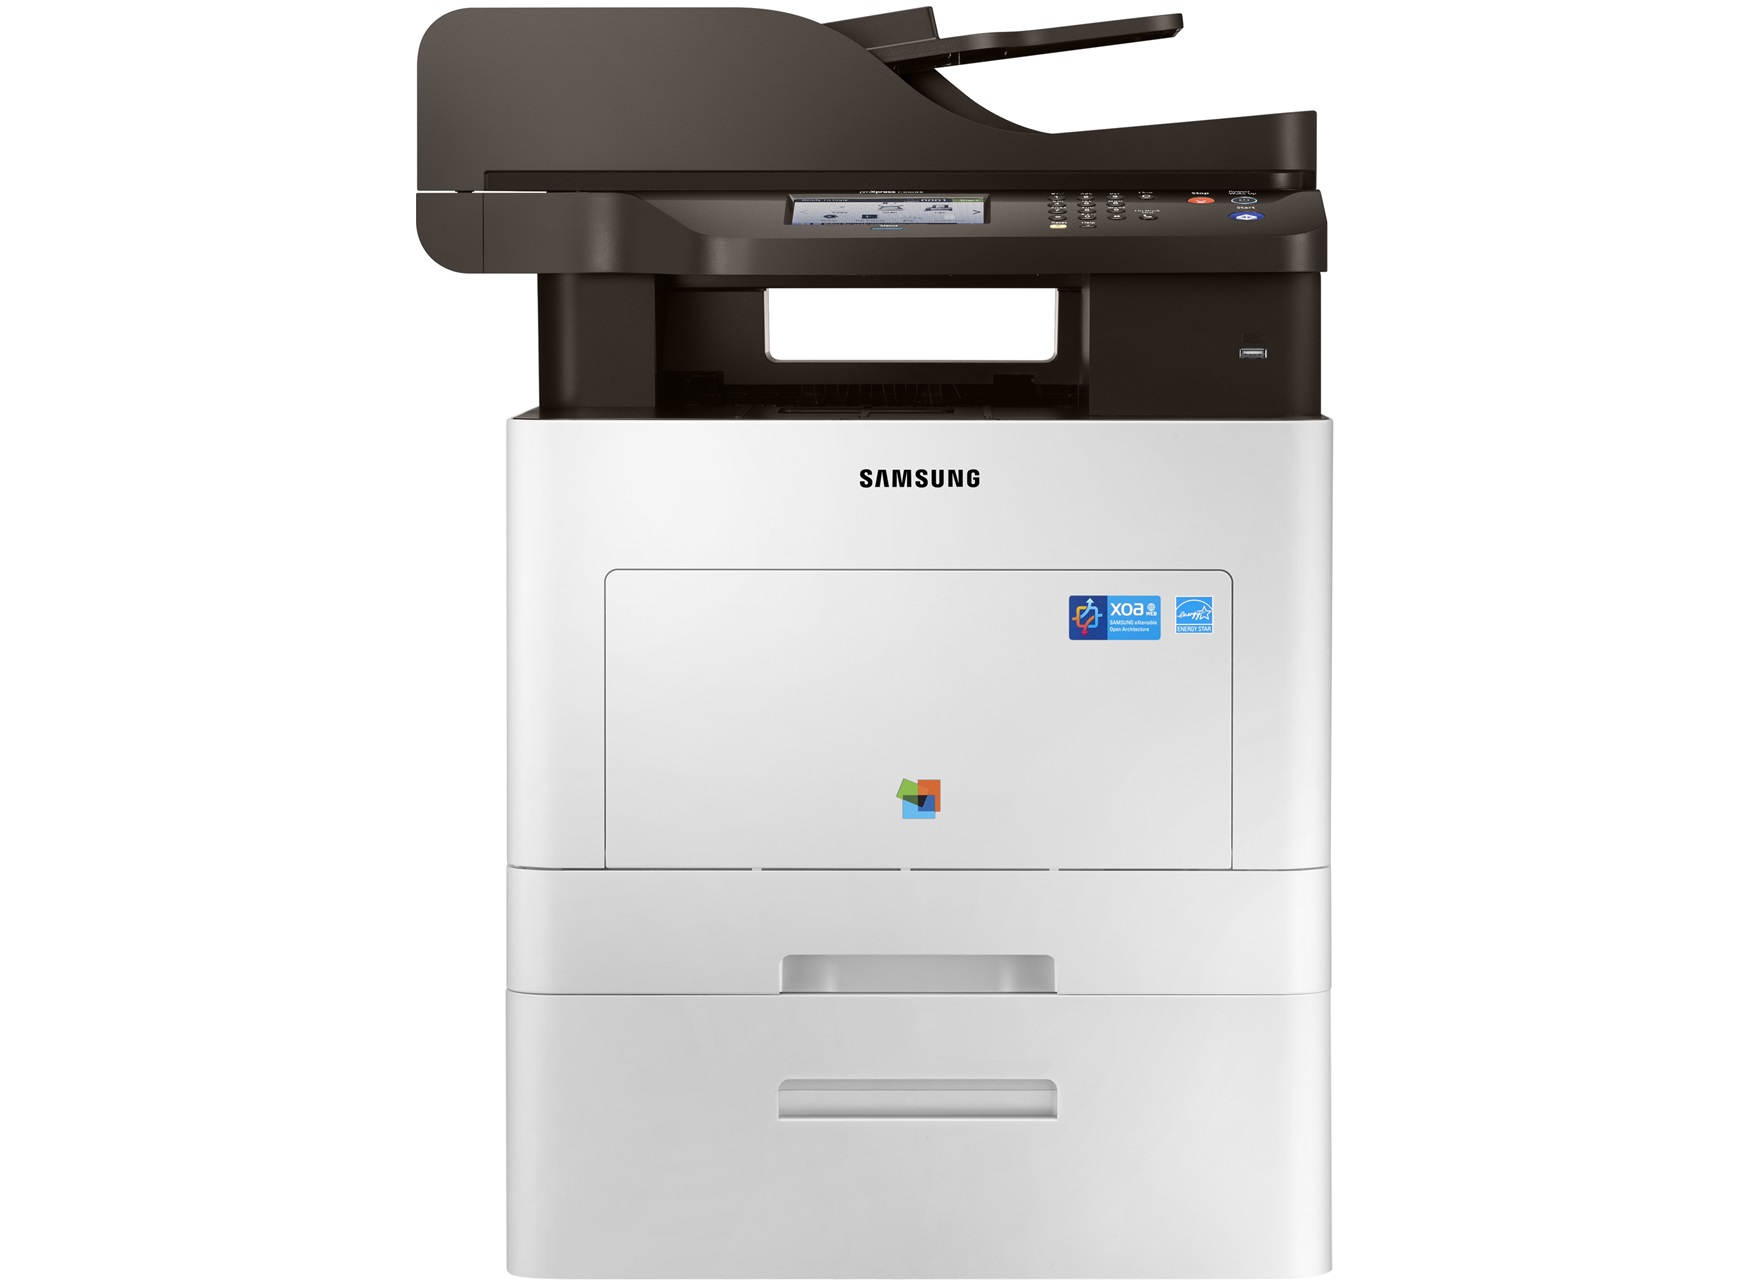 Samsung Proxpress Sl-c3060 Color Laser Multifunction Printer Series Driver For Mac Os